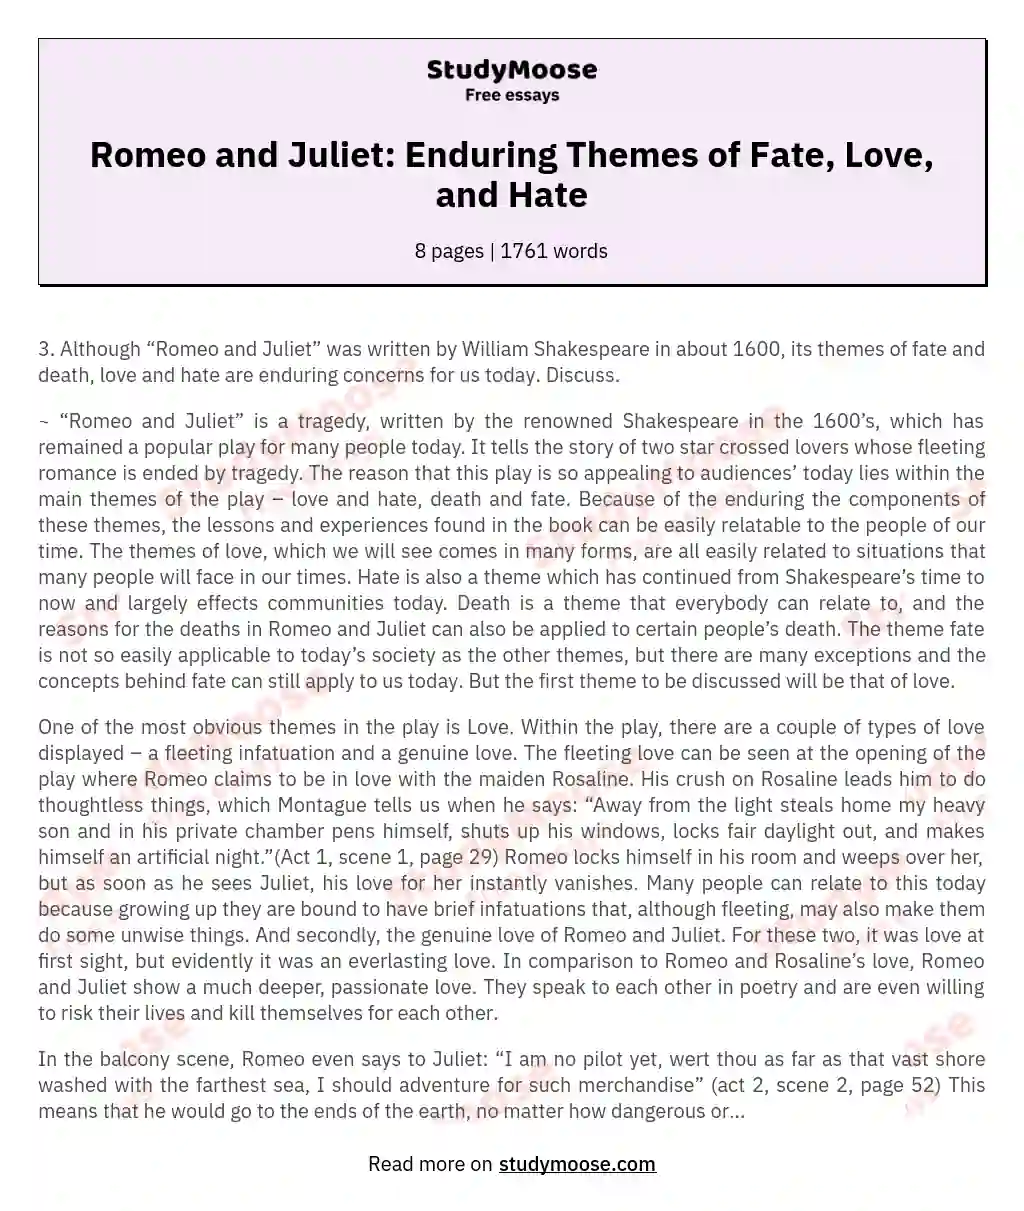 Although “Romeo and Juliet” Was Written by William Shakespeare in About 1600, Its Themes of Fate and Death, Love and Hate Are Enduring Concerns for Us Today. Discuss.